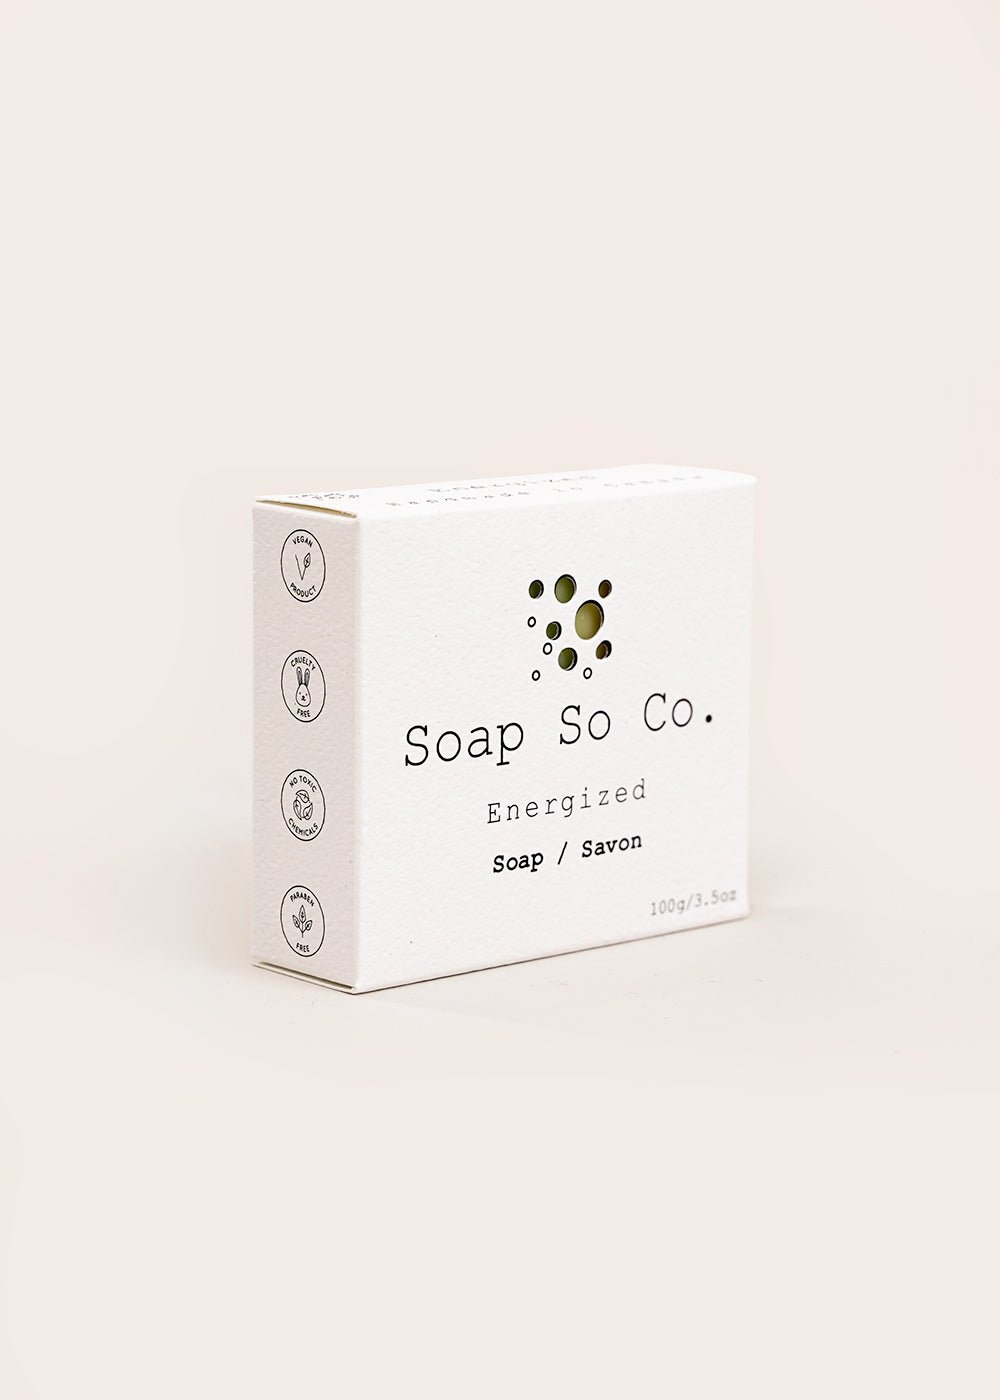 Soap So Co. Sunsets Bar Soap - New Classics Studios Sustainable Ethical Fashion Canada